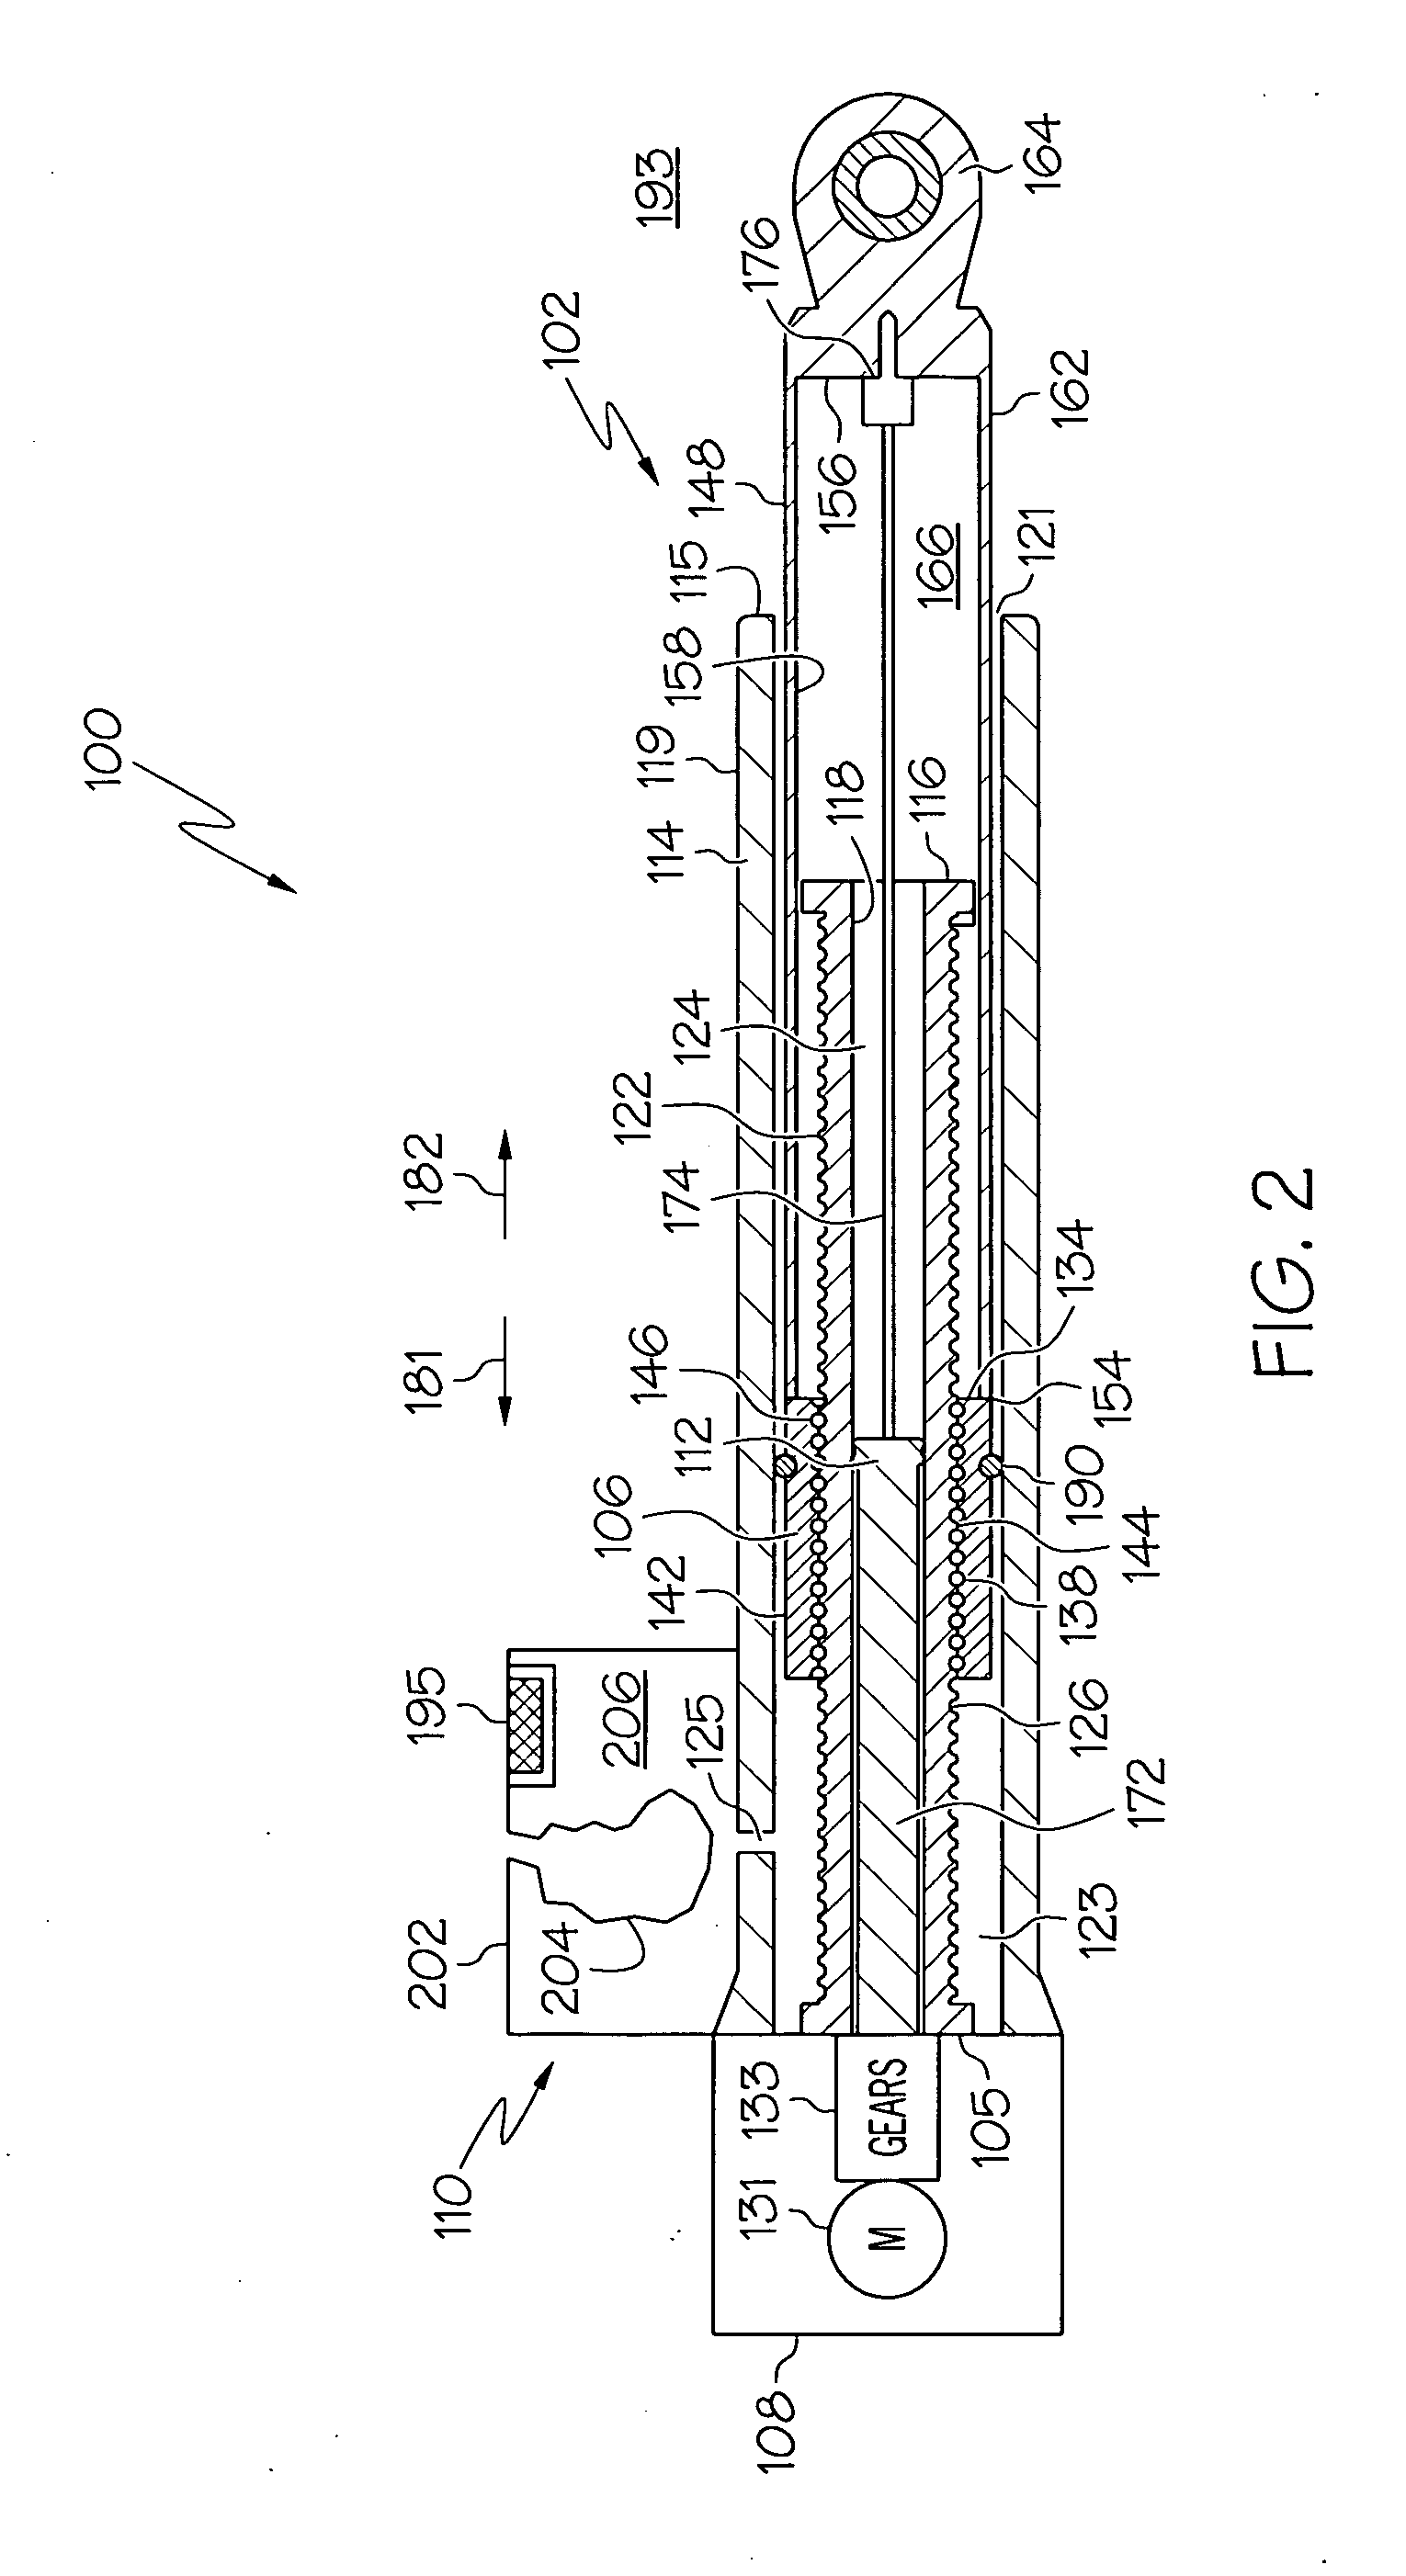 Electromechanical linear actuator including an environmental control and air management system